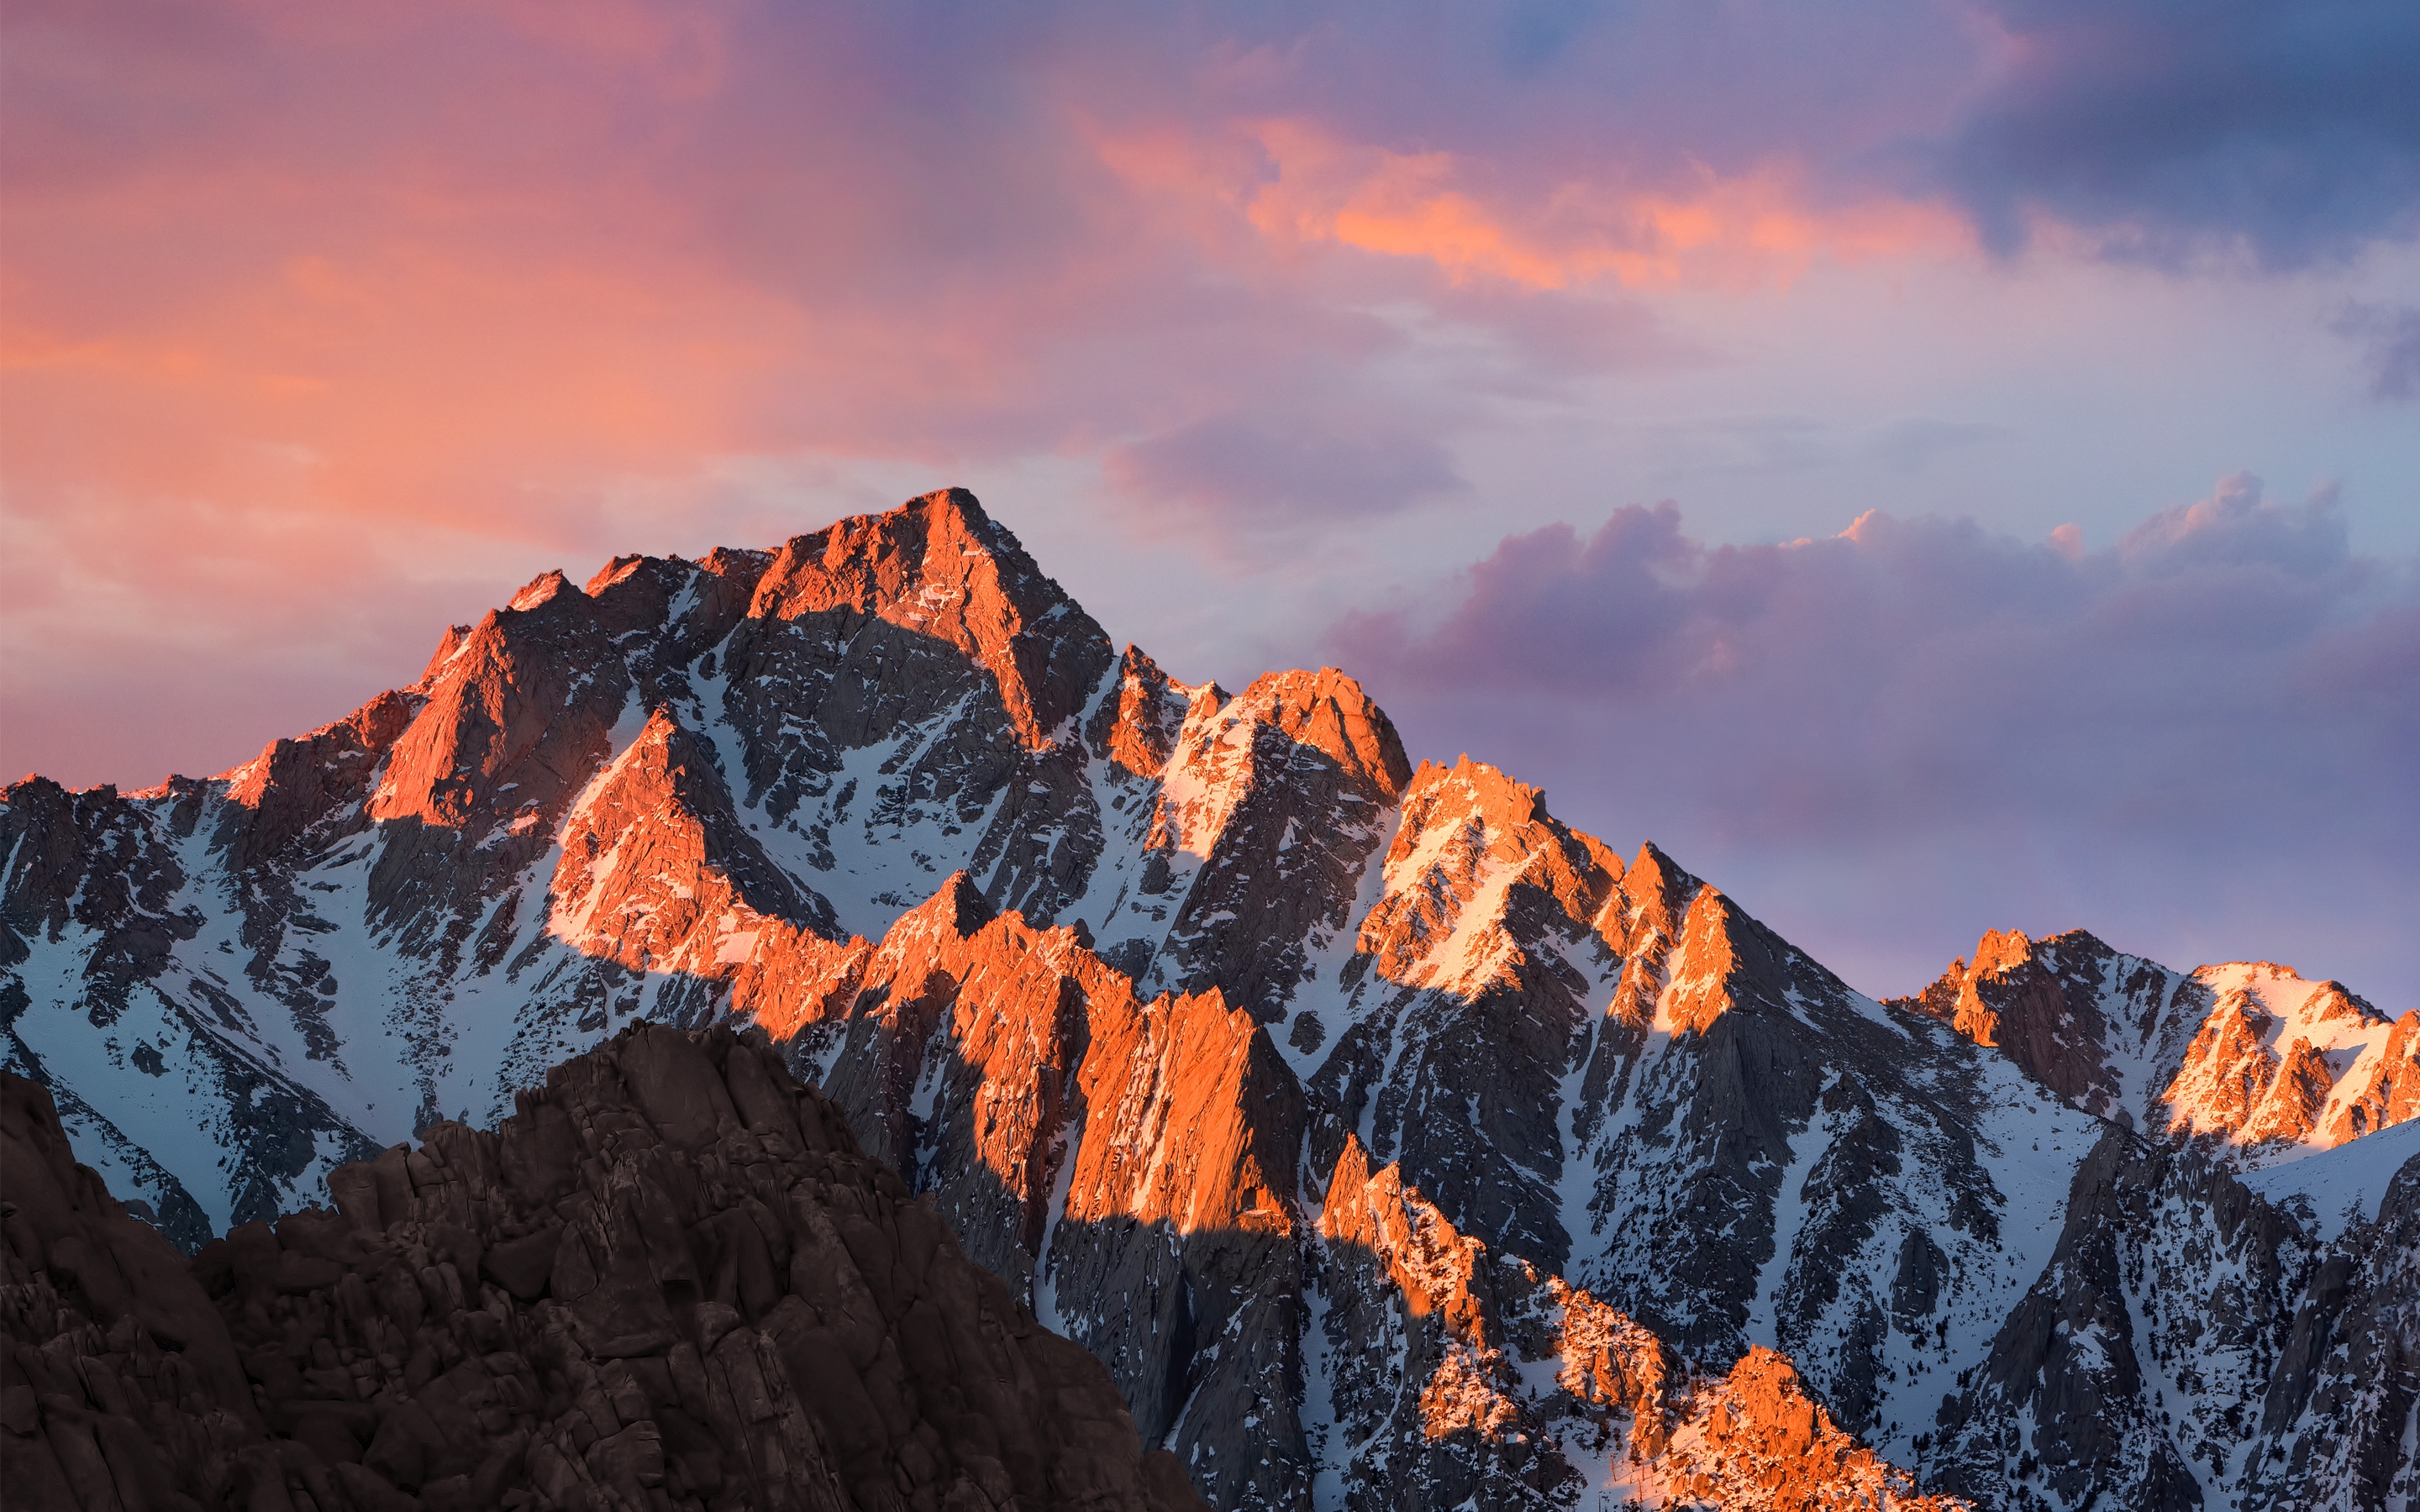 The New Macos Sierra Wallpaper For iPhone iPad